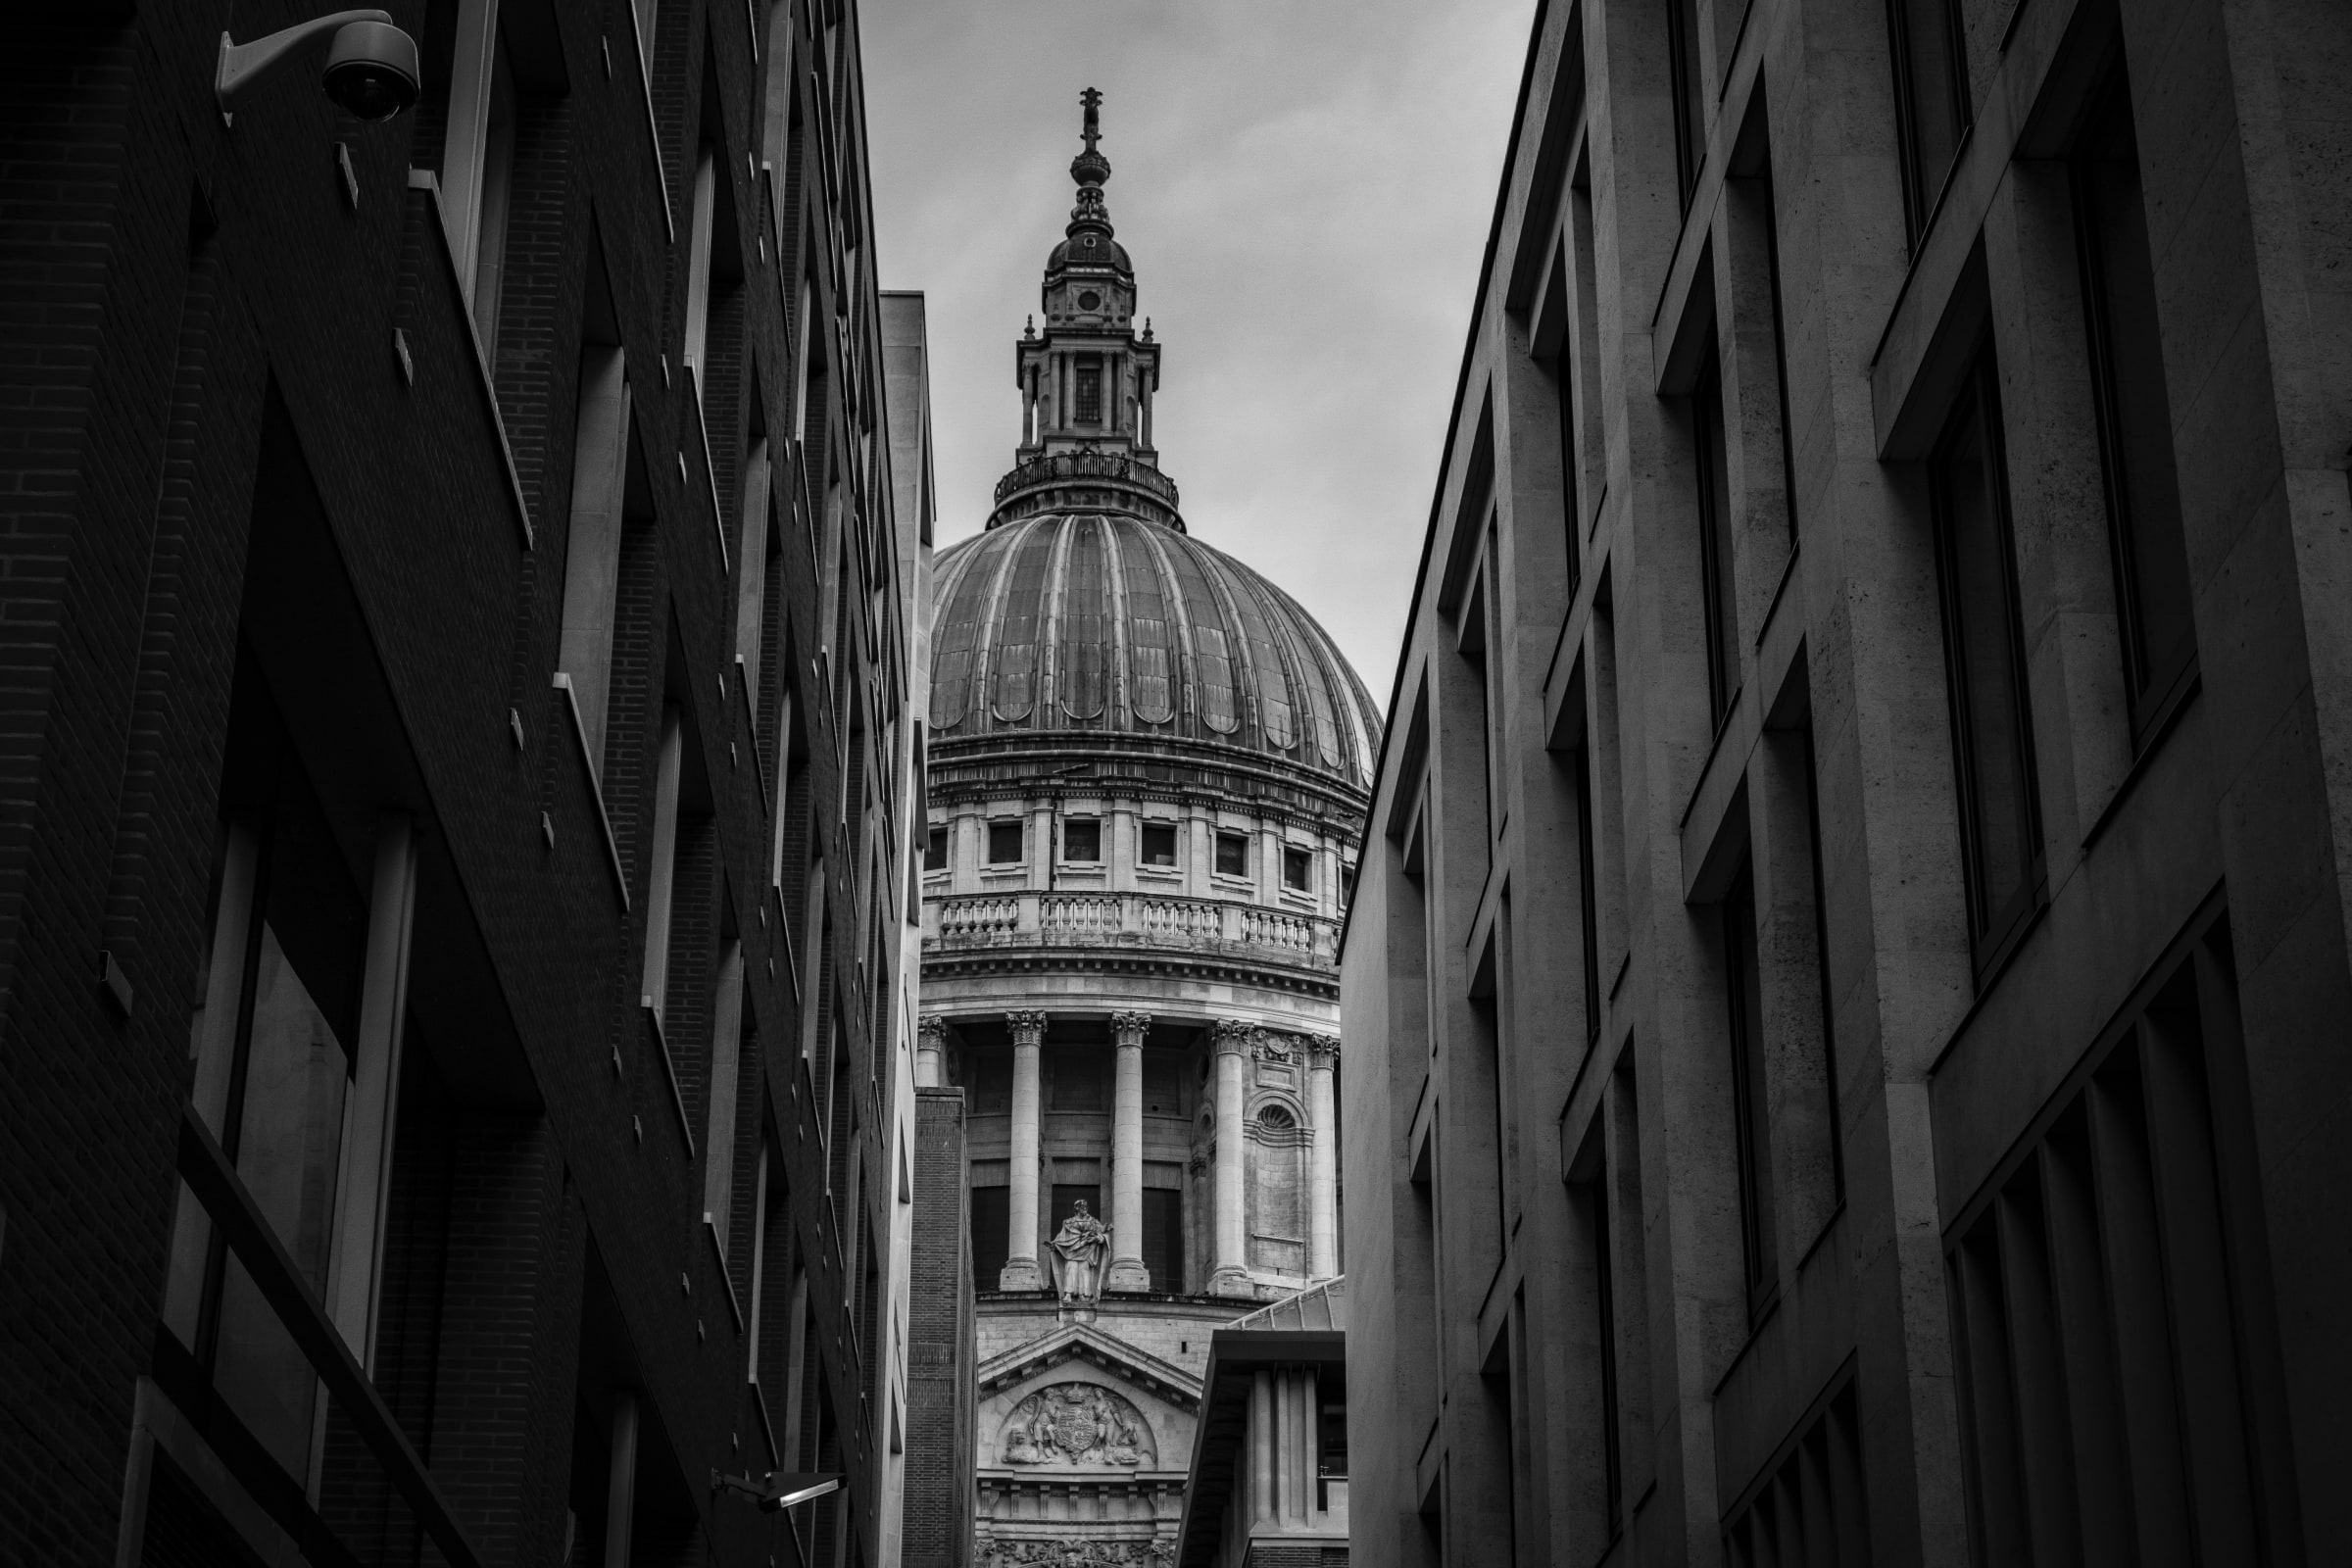 Buildings and architecture in London